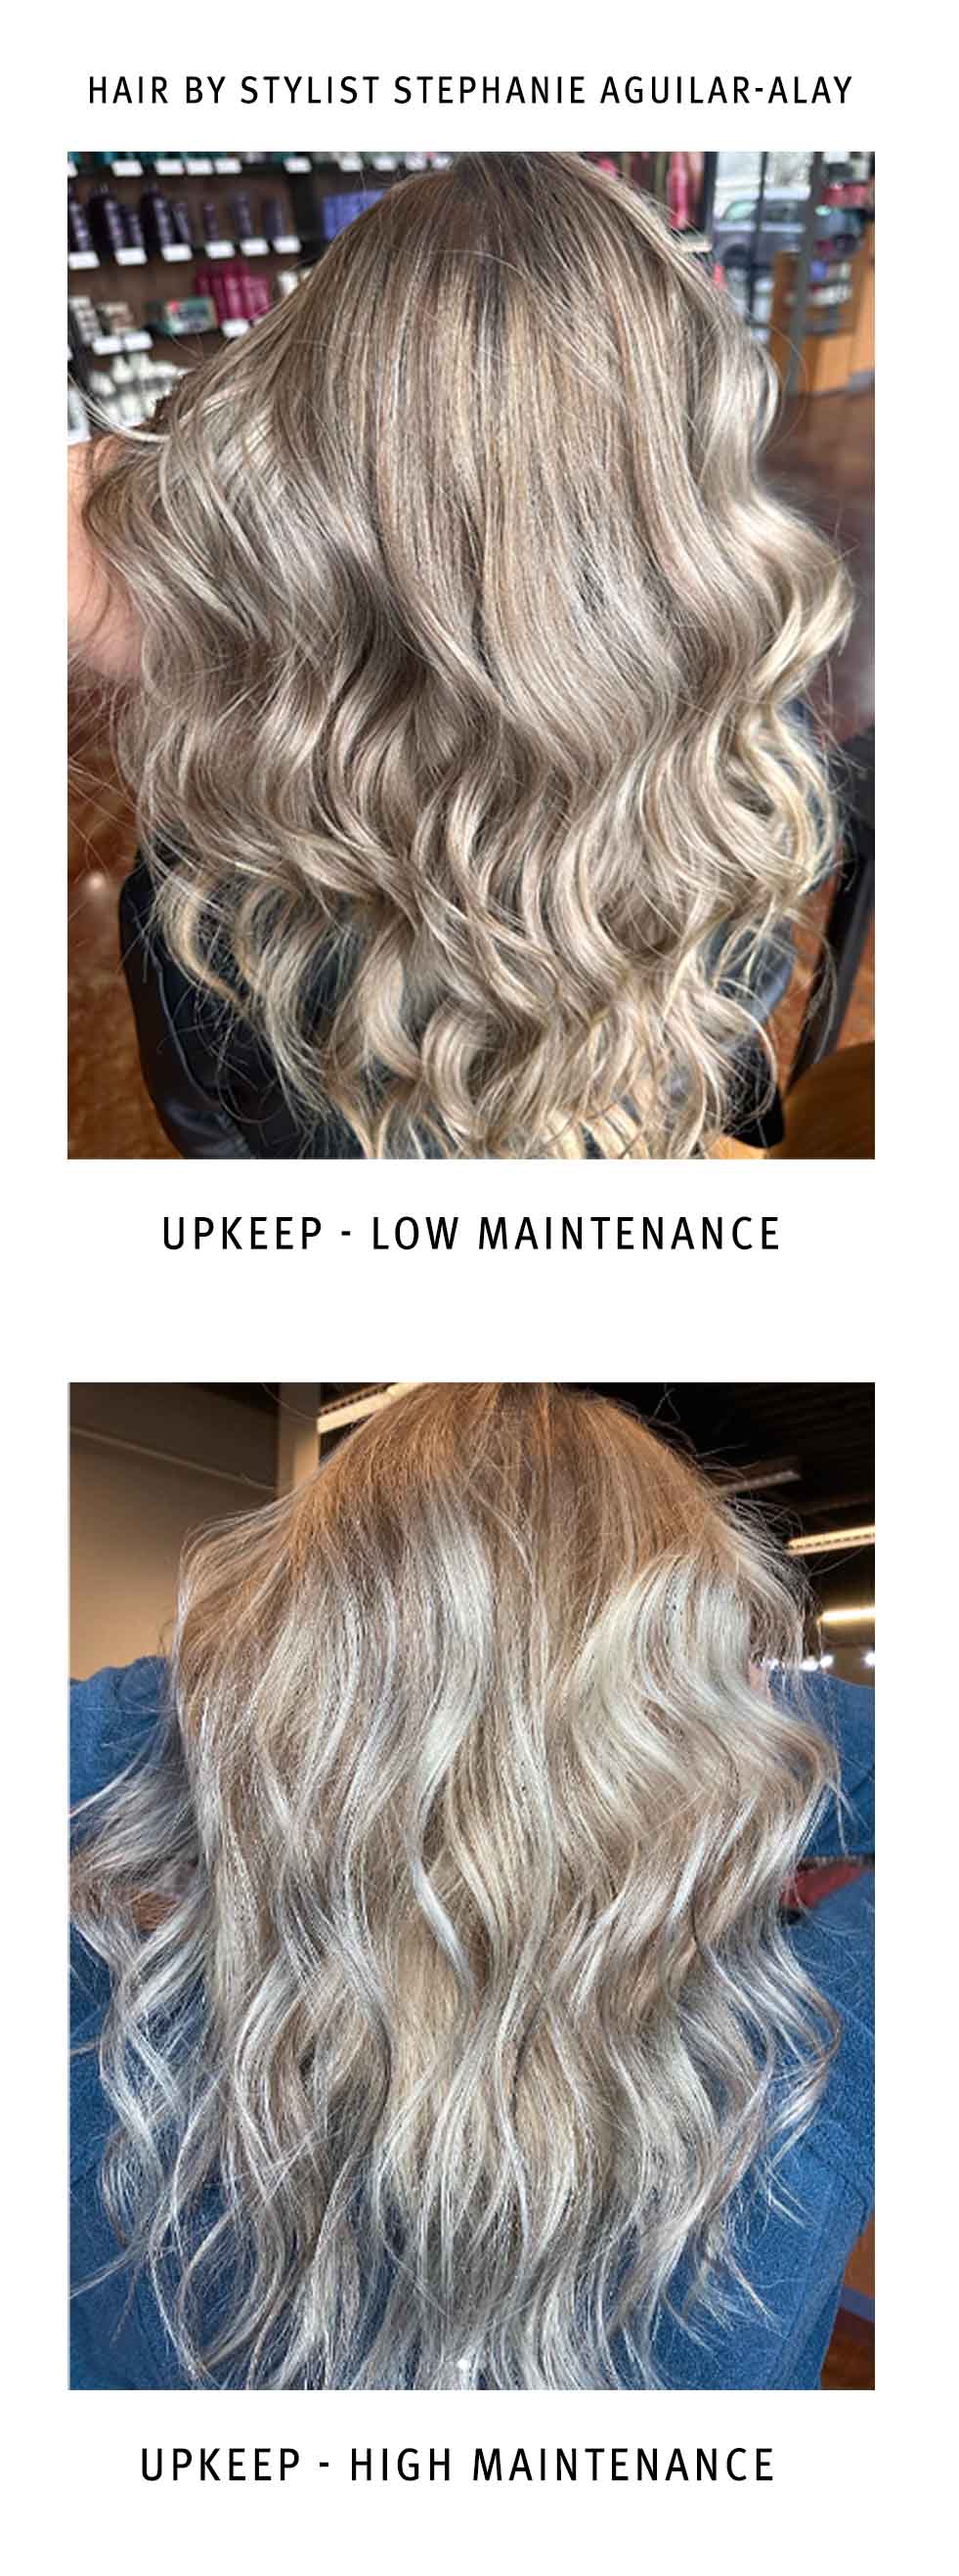 image of upkeep on hair comparing warm vs cool blonde